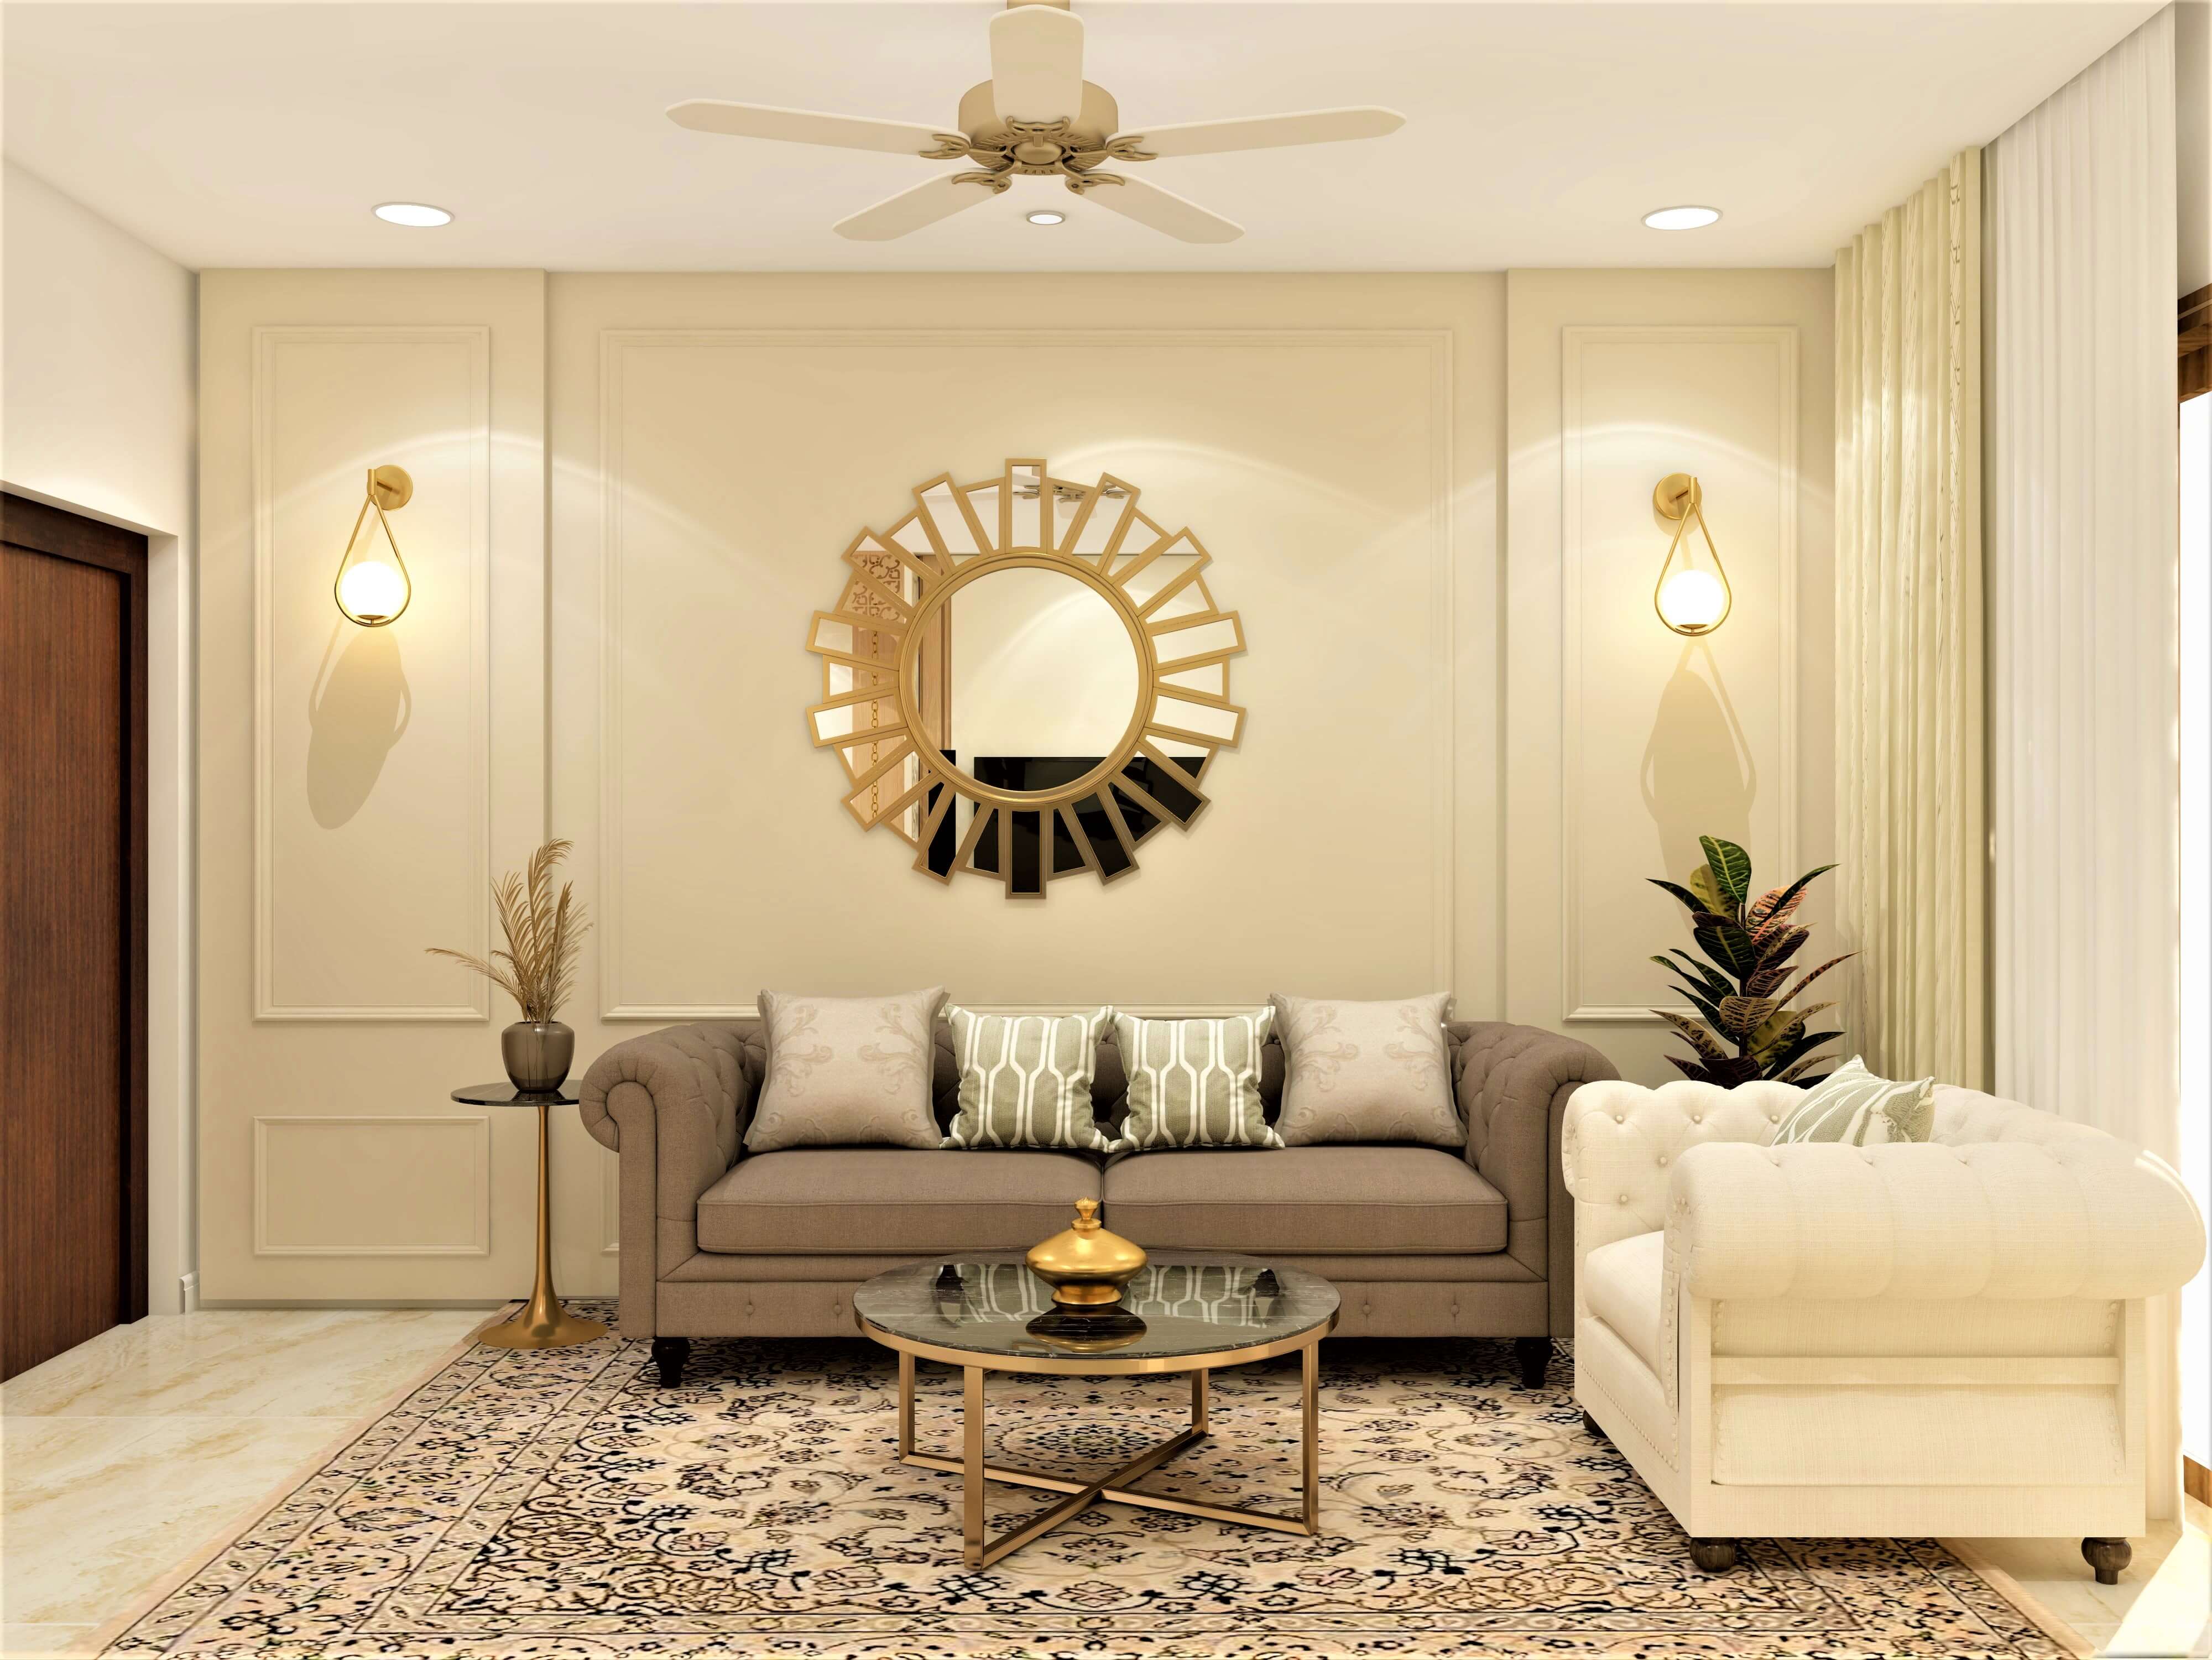 Monochrome living room with a puja unit design - Beautiful Homes